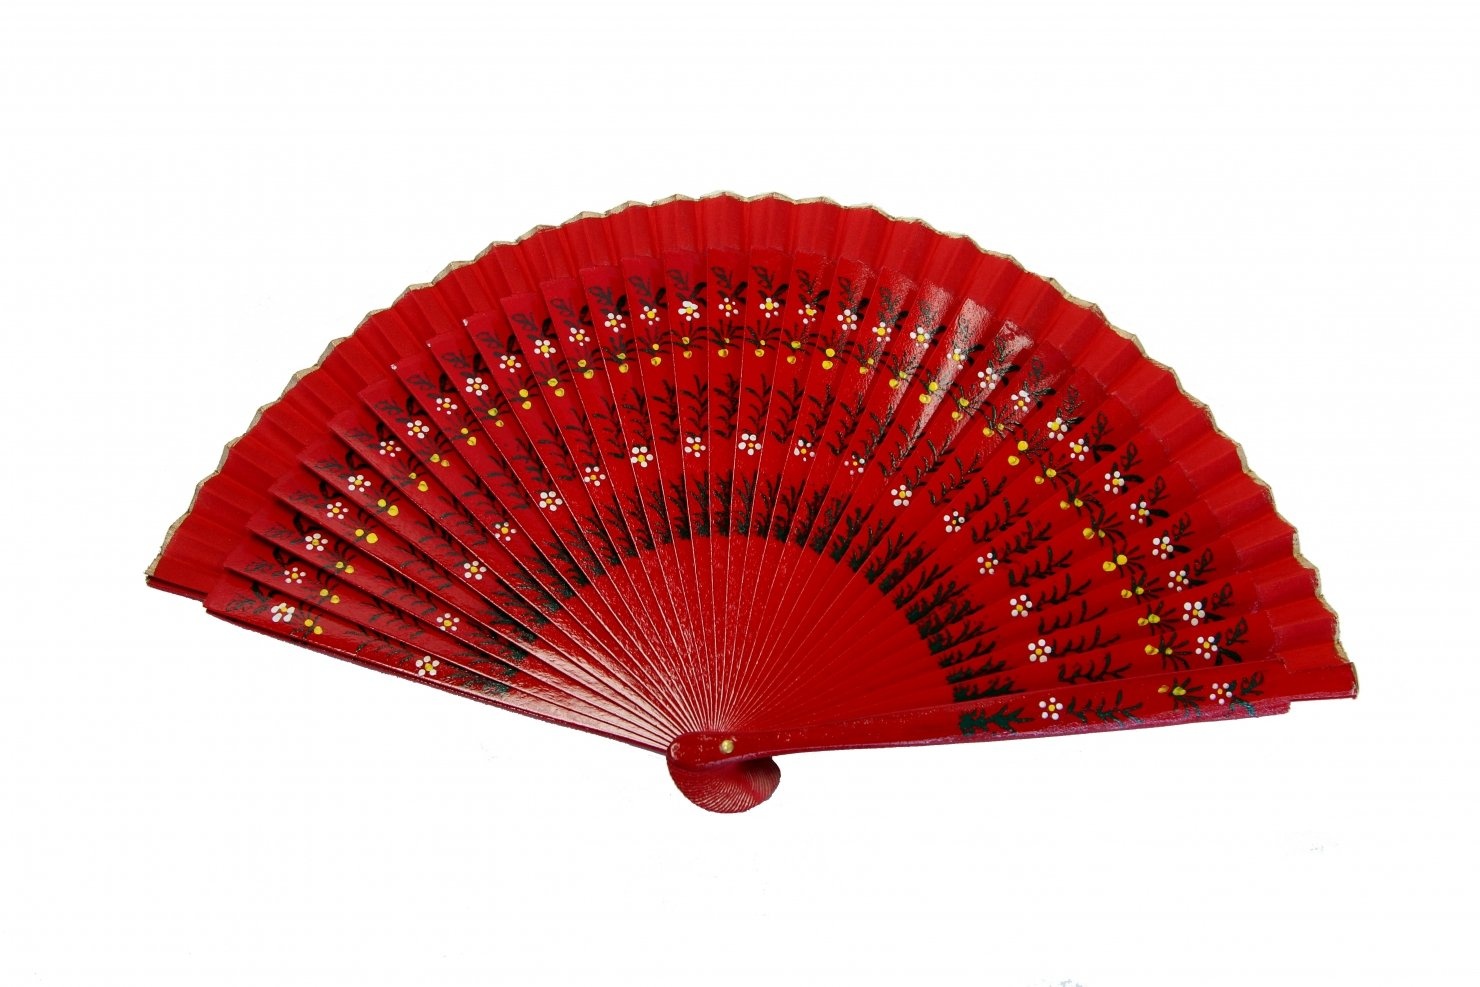 Feng Shui Import Wooden Hand Fan with Cloth on The Edge (Red)